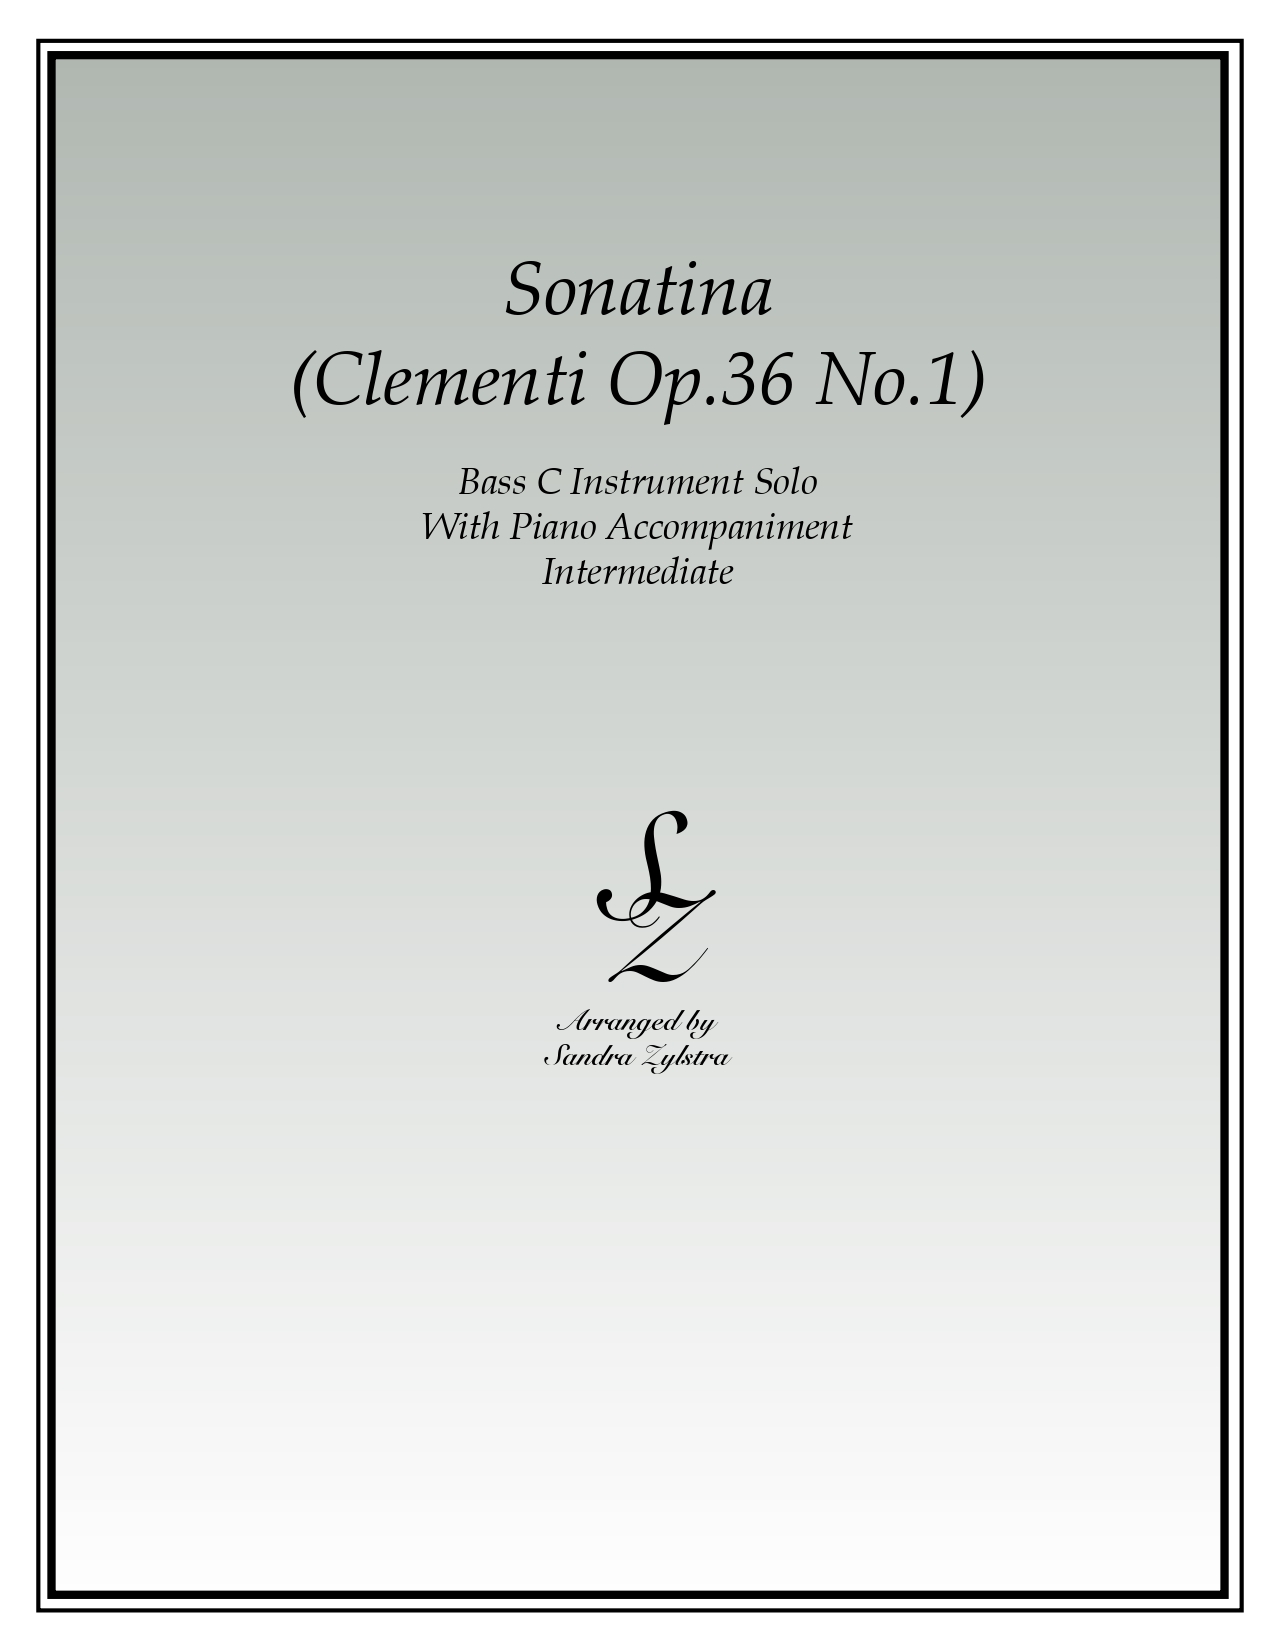 Sonatina Clementi Op. 36. No. 1 bass C instrument solo part cover page 00011